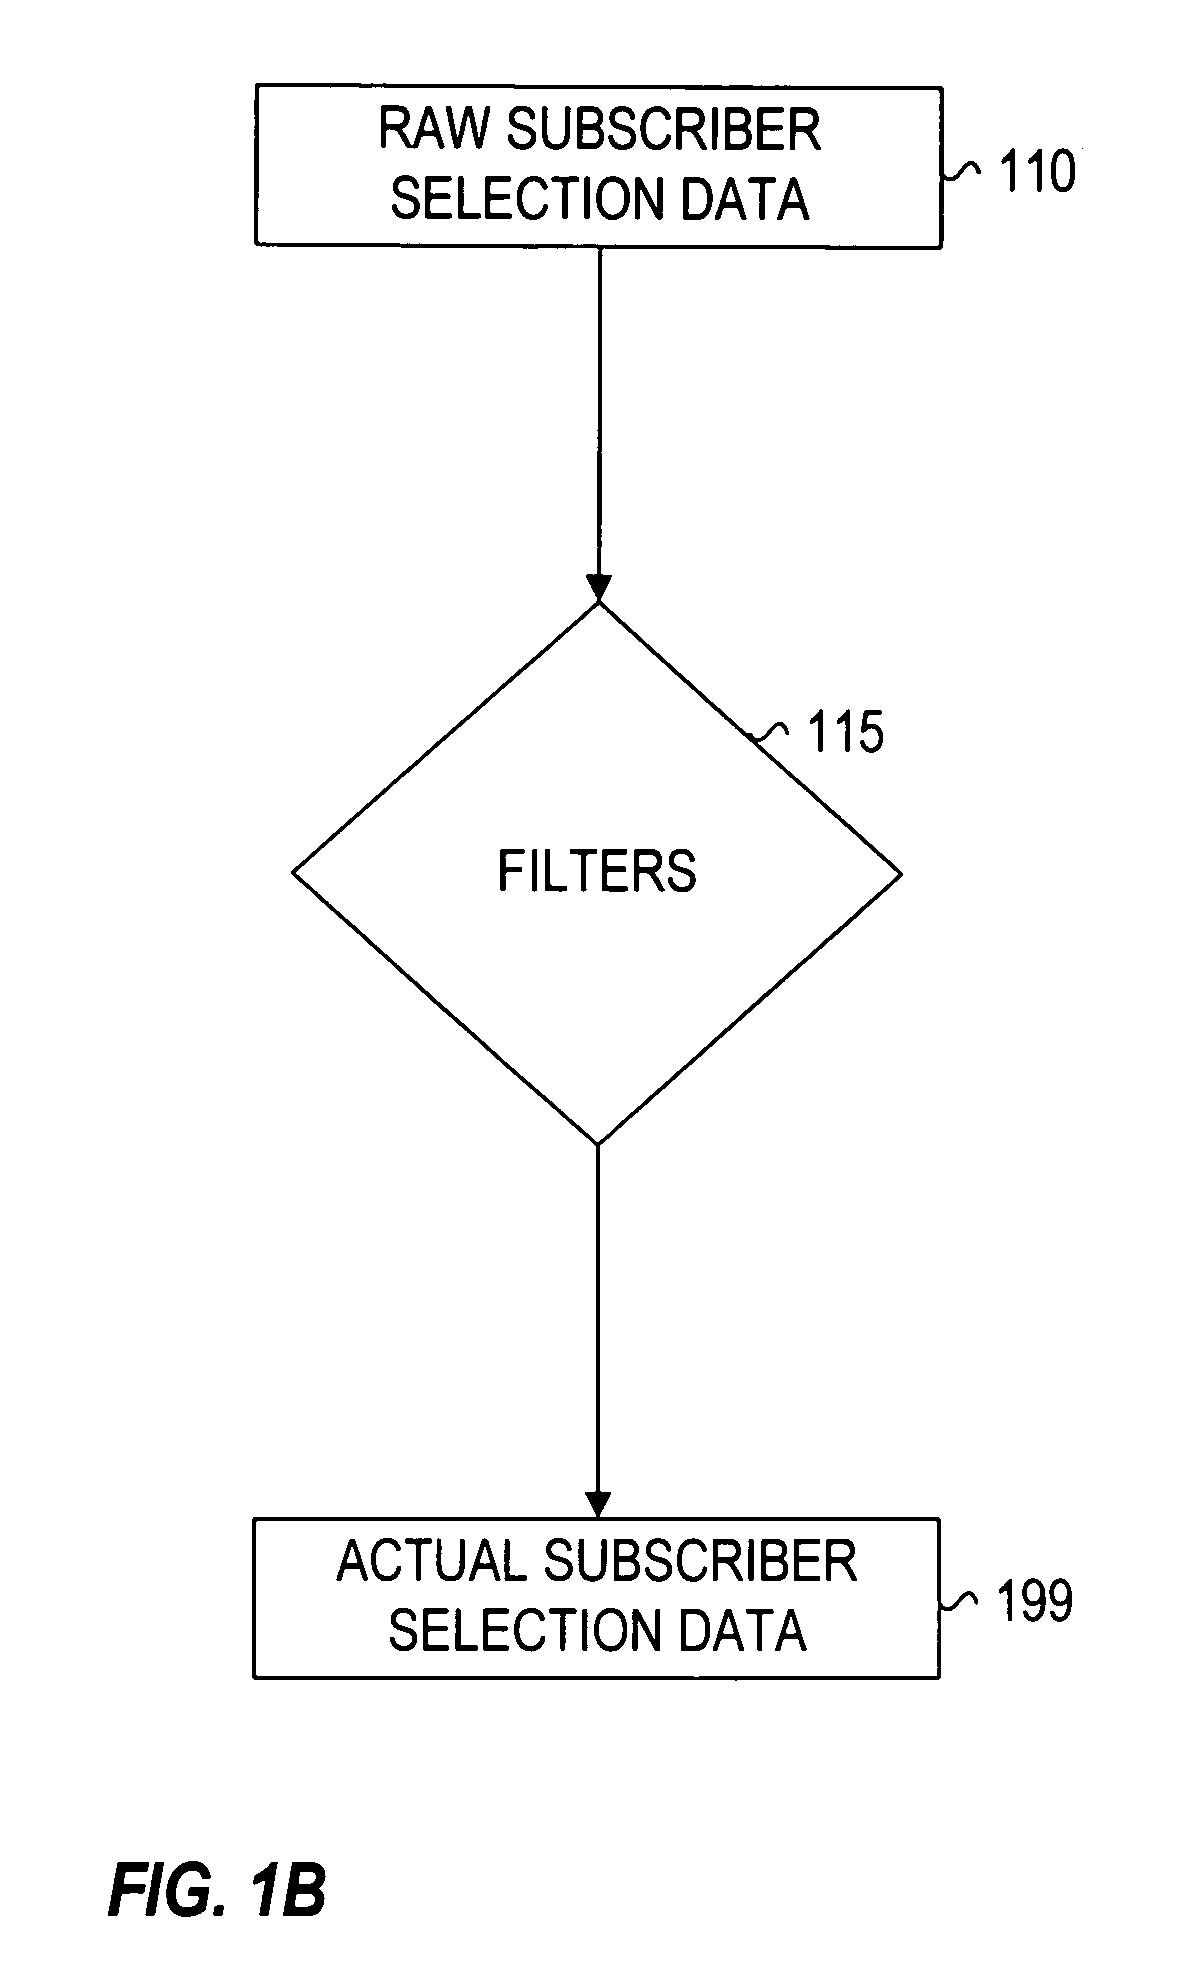 Subscriber characterization system with filters